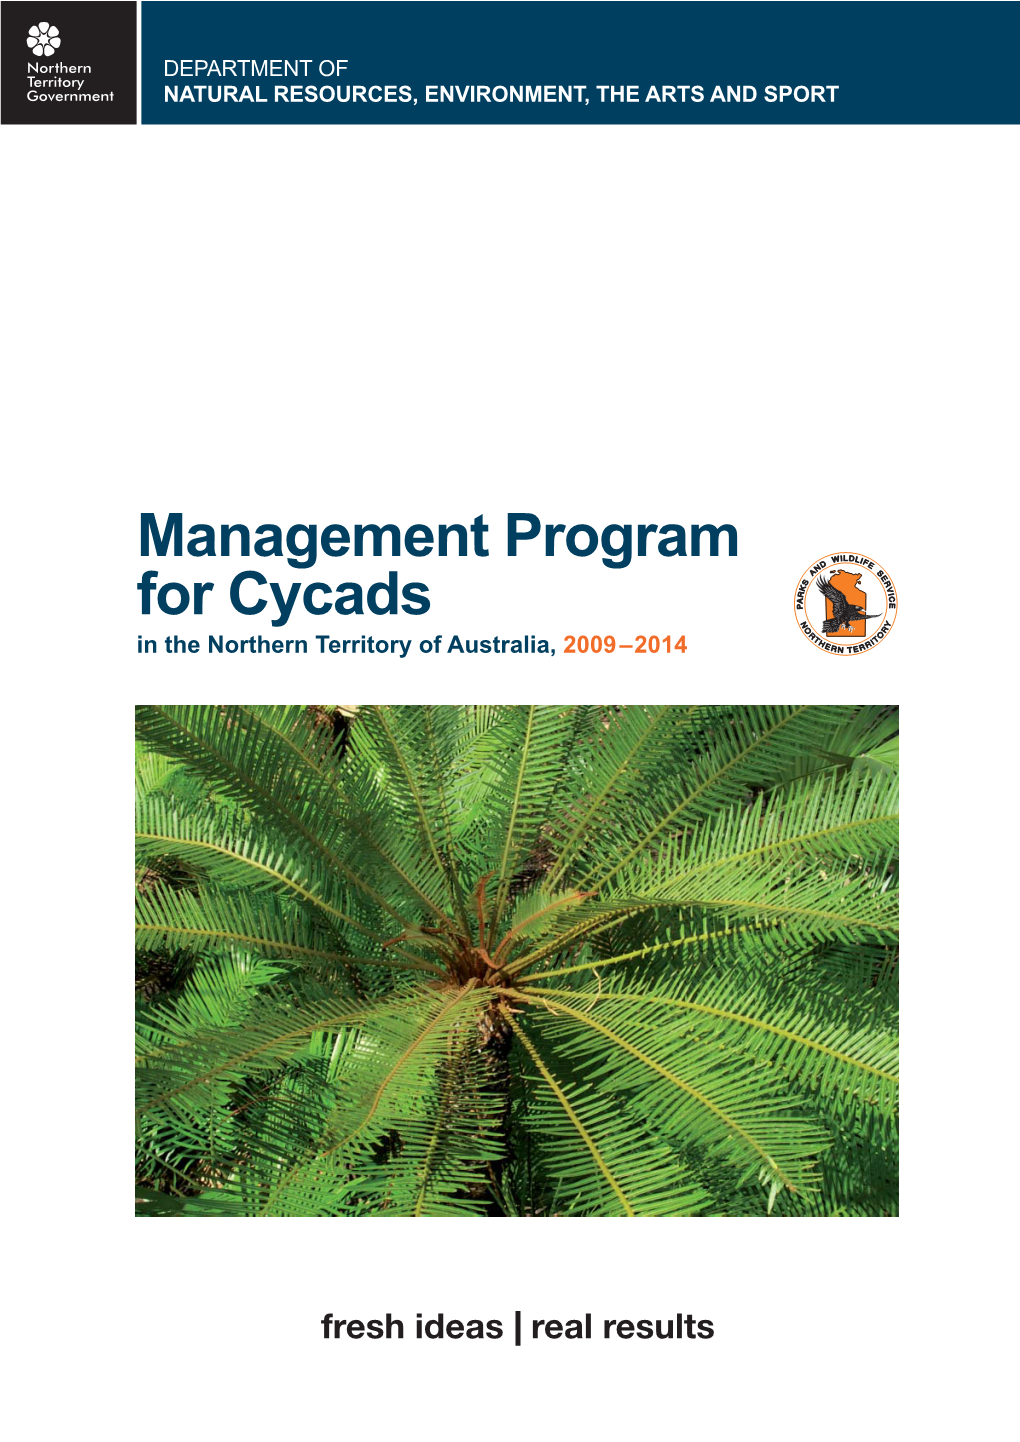 Management Program for Cycads in the Northern Territory of Australia, 2009-2014